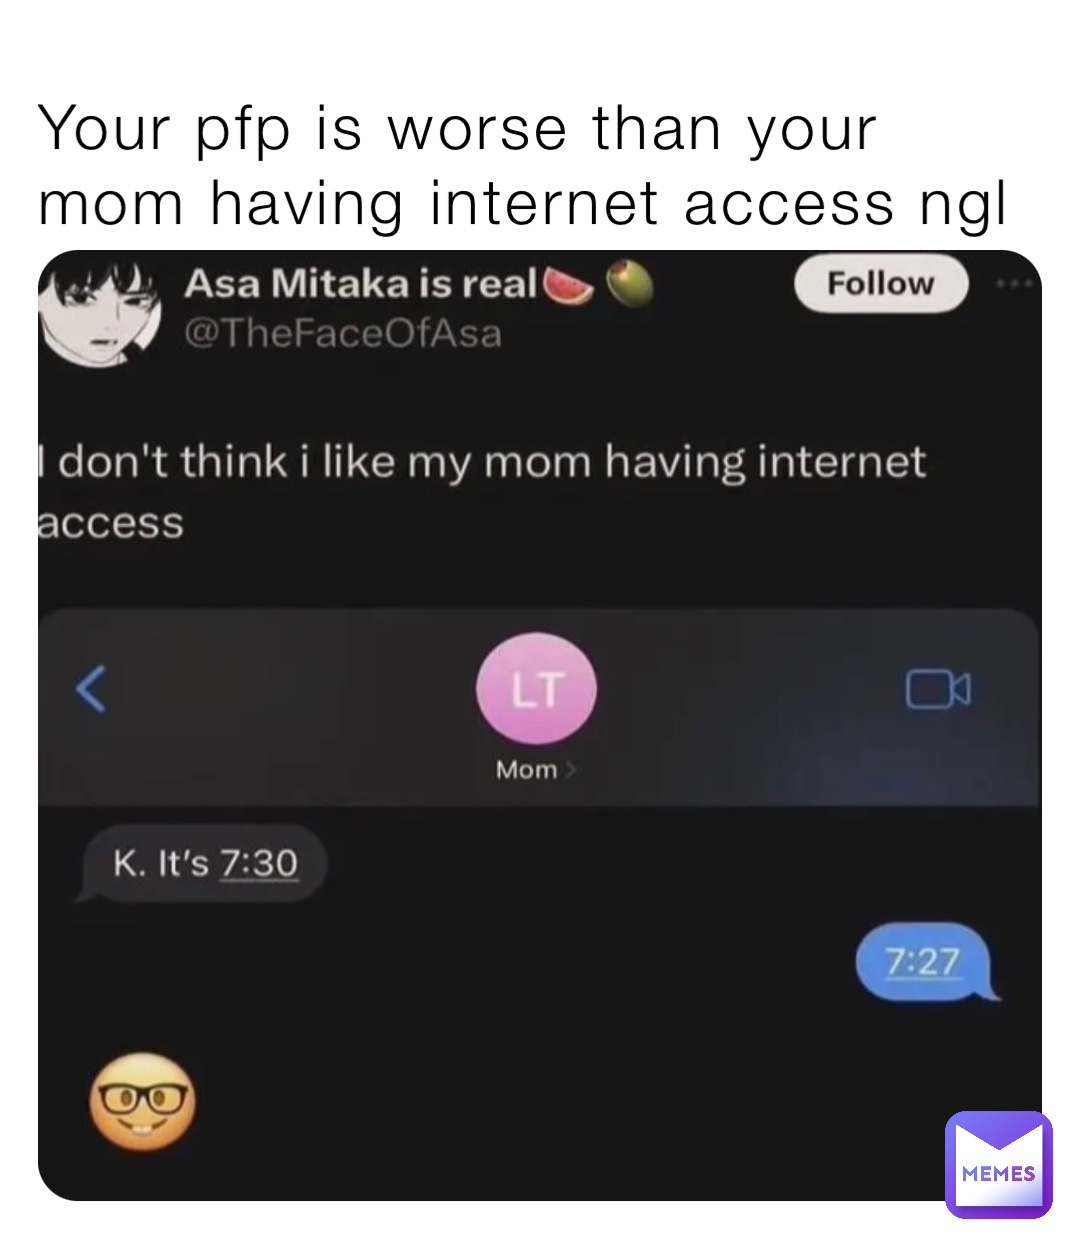 Your pfp is worse than your mom having internet access ngl